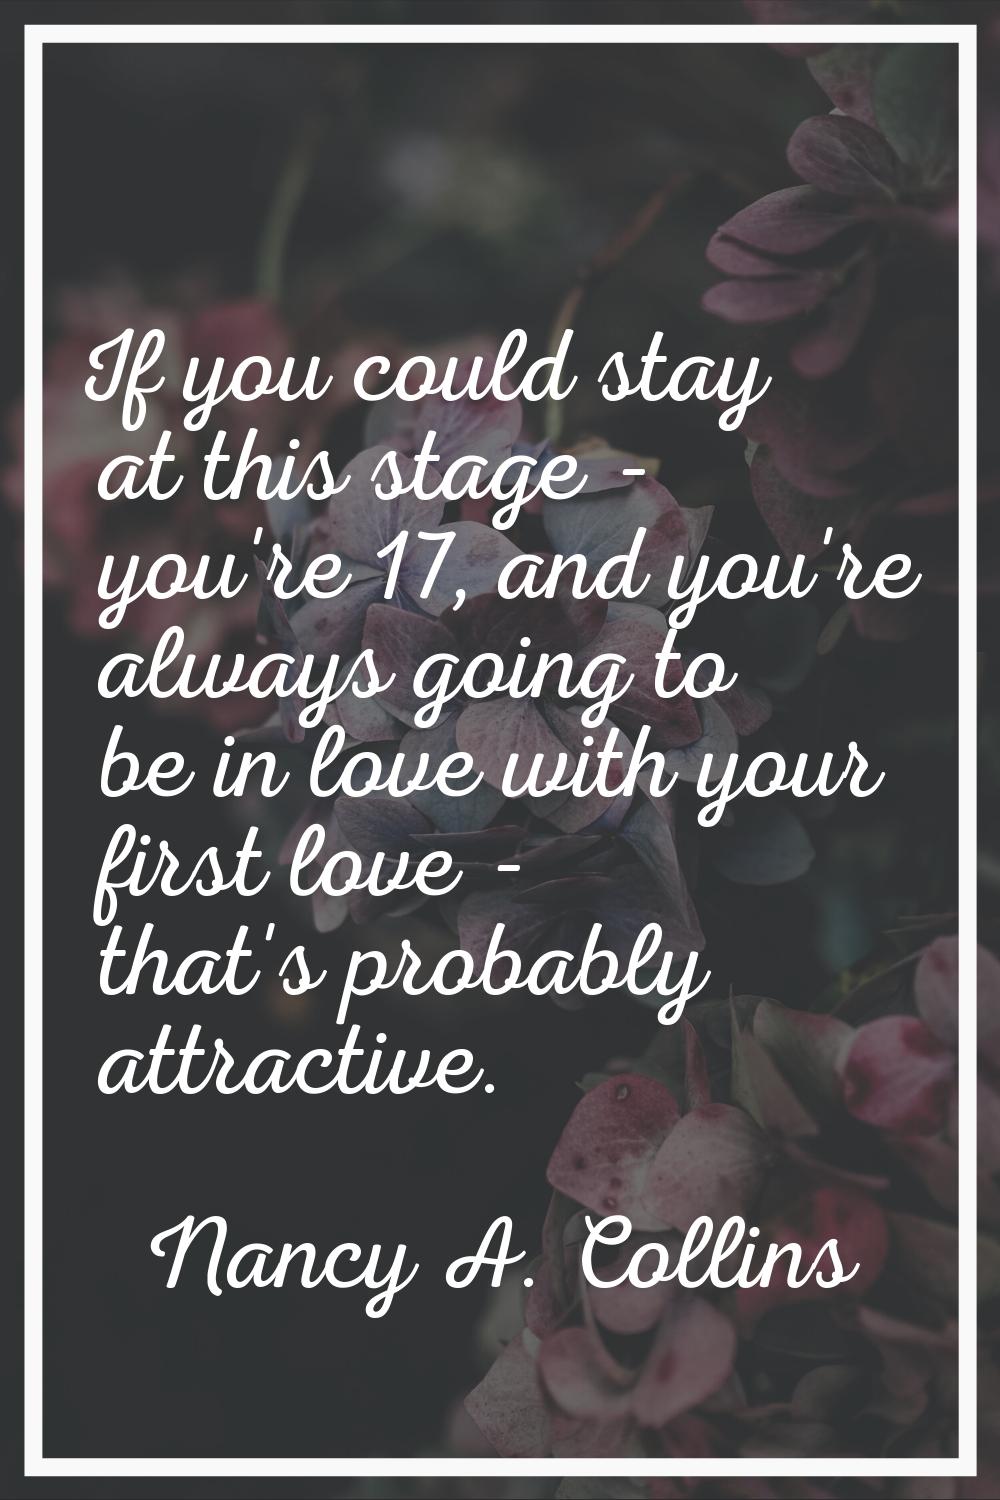 If you could stay at this stage - you're 17, and you're always going to be in love with your first 